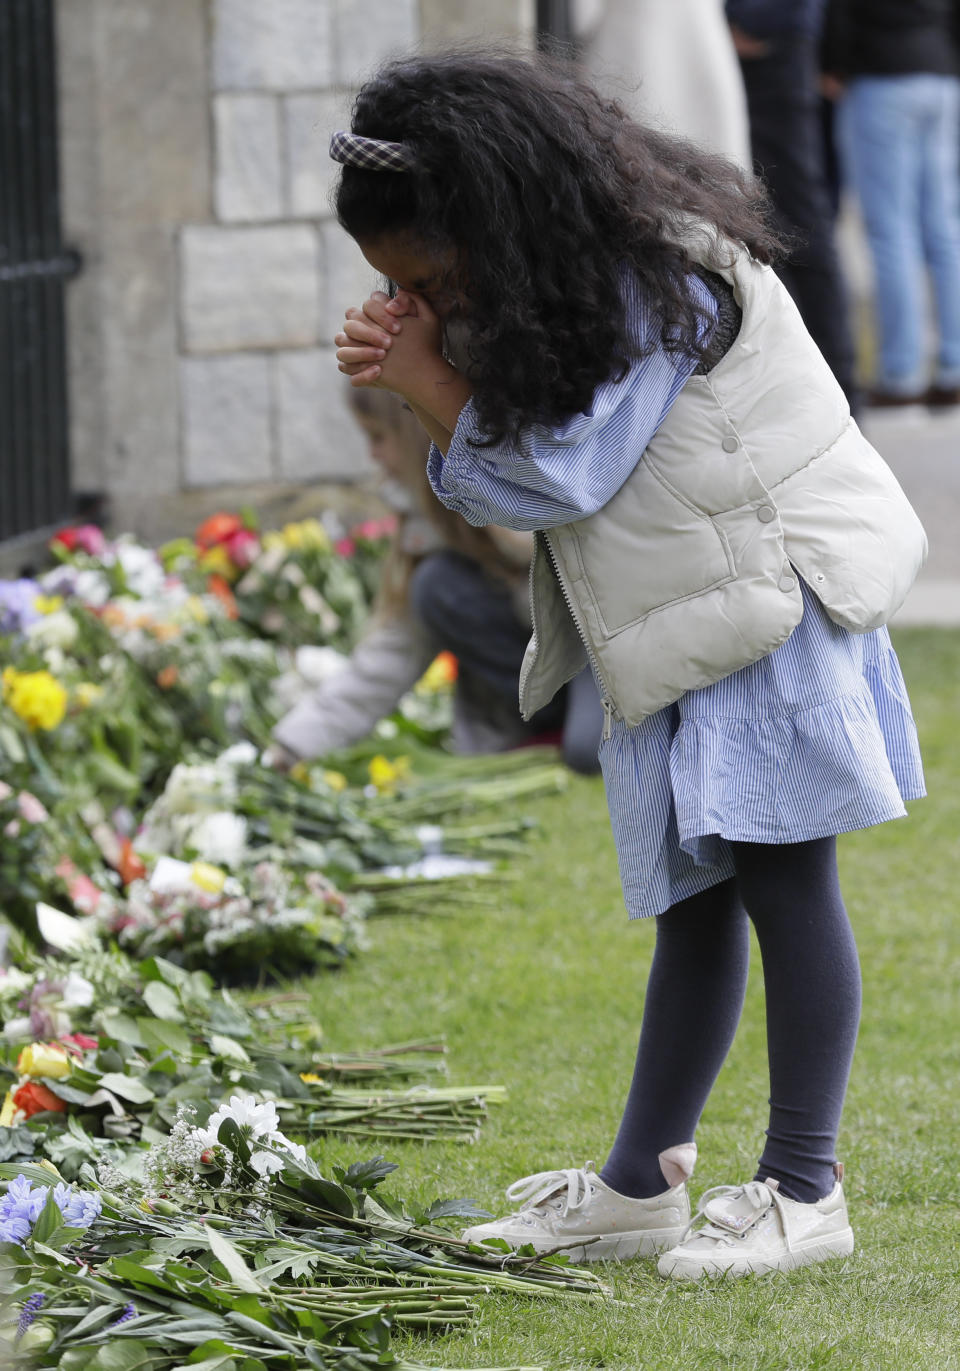 A child prays by the flowers left outside Windsor Castle in Windsor, England Sunday, April 11, 2021. Britain's Prince Philip, the irascible and tough-minded husband of Queen Elizabeth II who spent more than seven decades supporting his wife in a role that mostly defined his life, died on Friday. (AP Photo/Kirsty Wigglesworth)